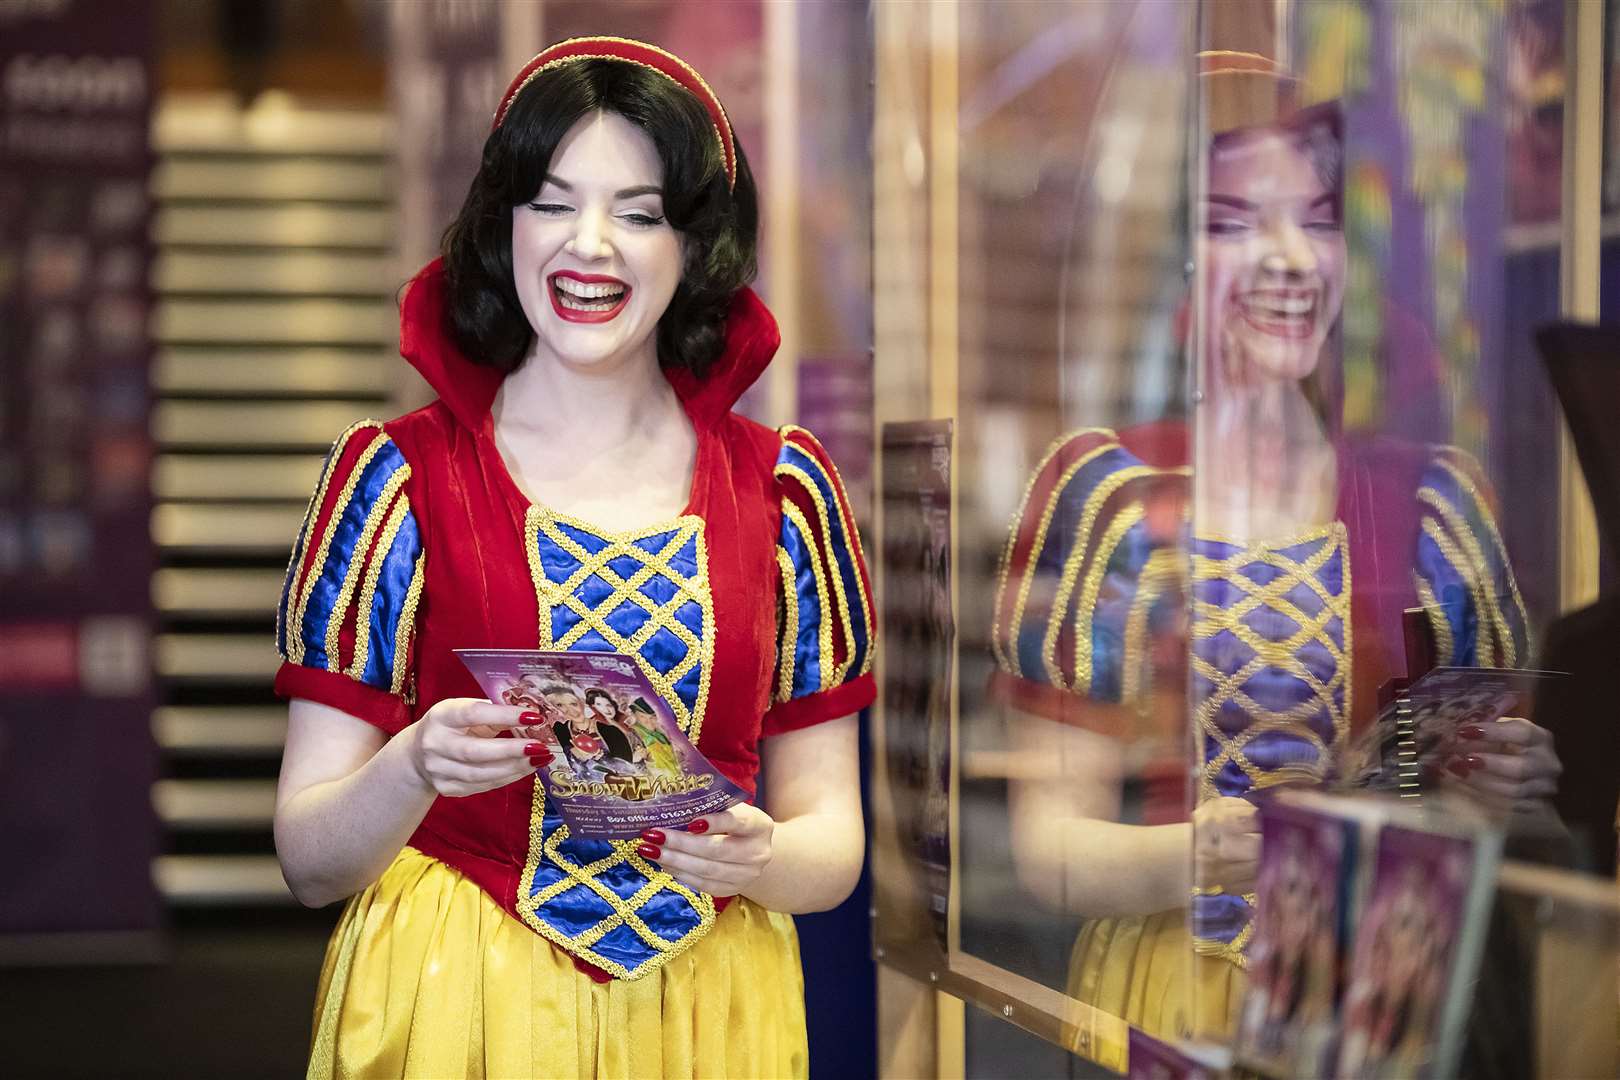 West End star, Hannah Boyce, plays the title role of Snow White